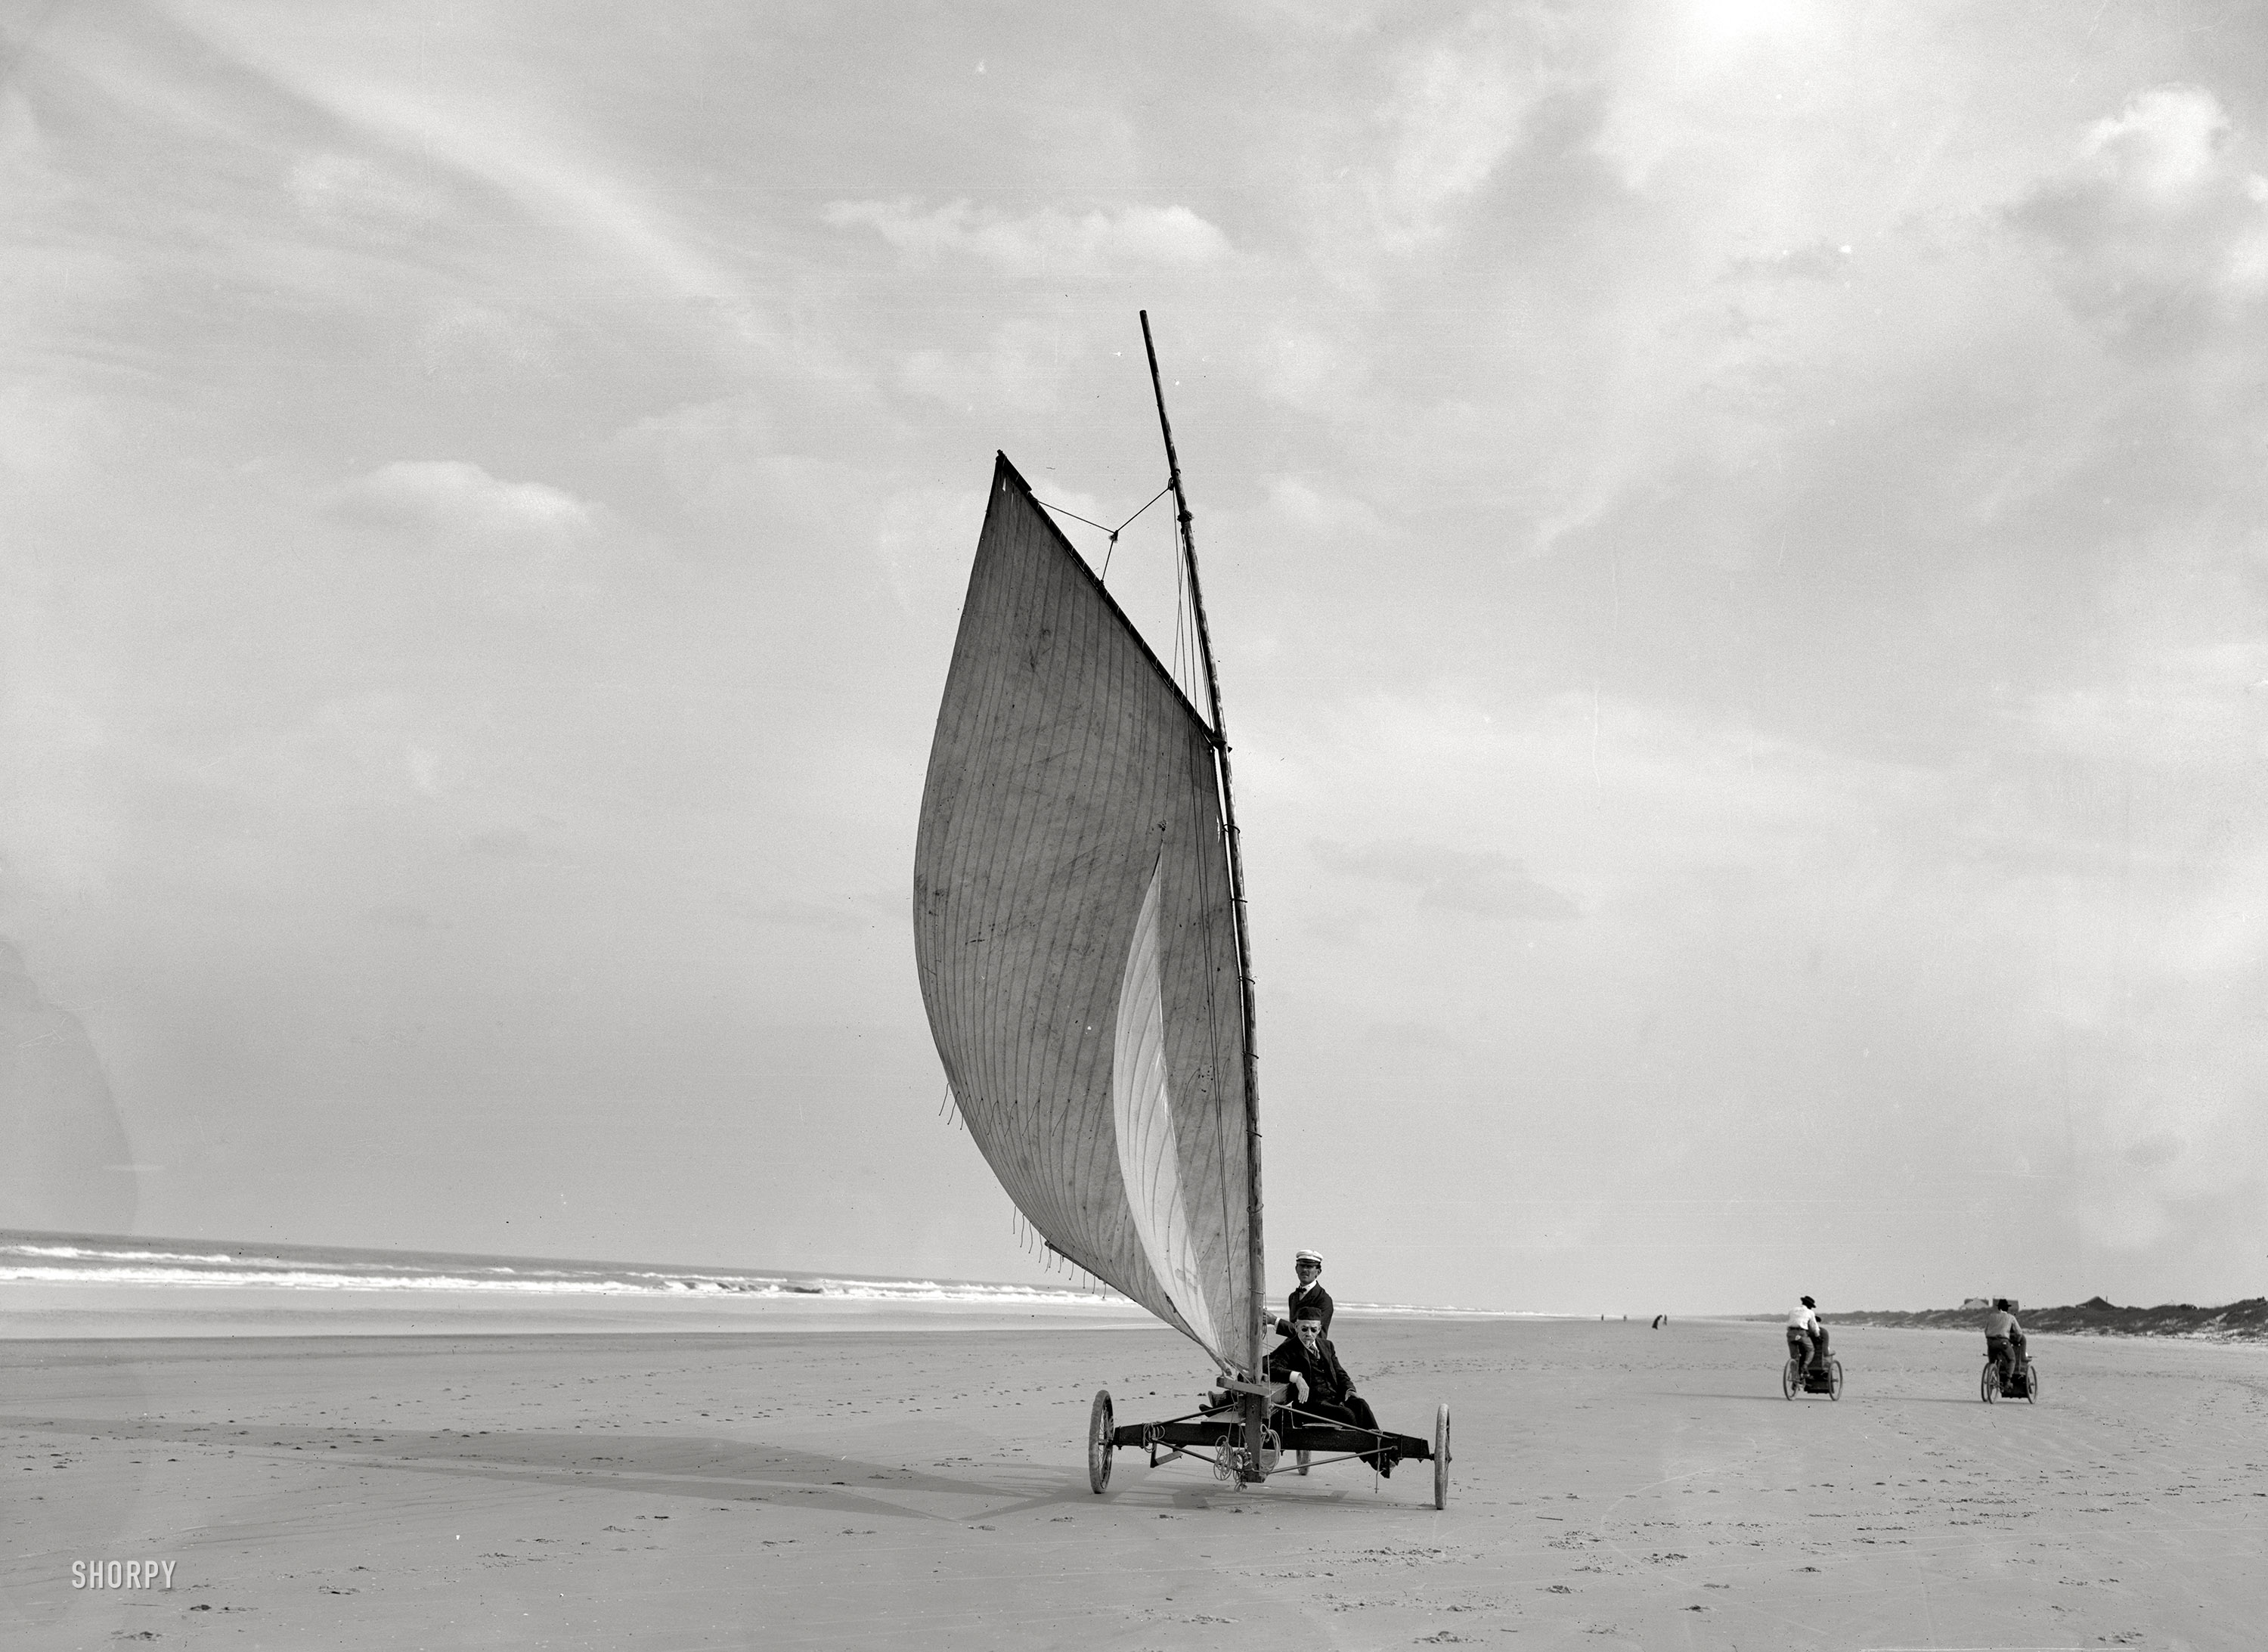 Circa 1903. "Sailing on the beach at Ormond, Florida." An interesting looking character at the controls. 8x10 glass negative, Detroit Publishing. View full size.